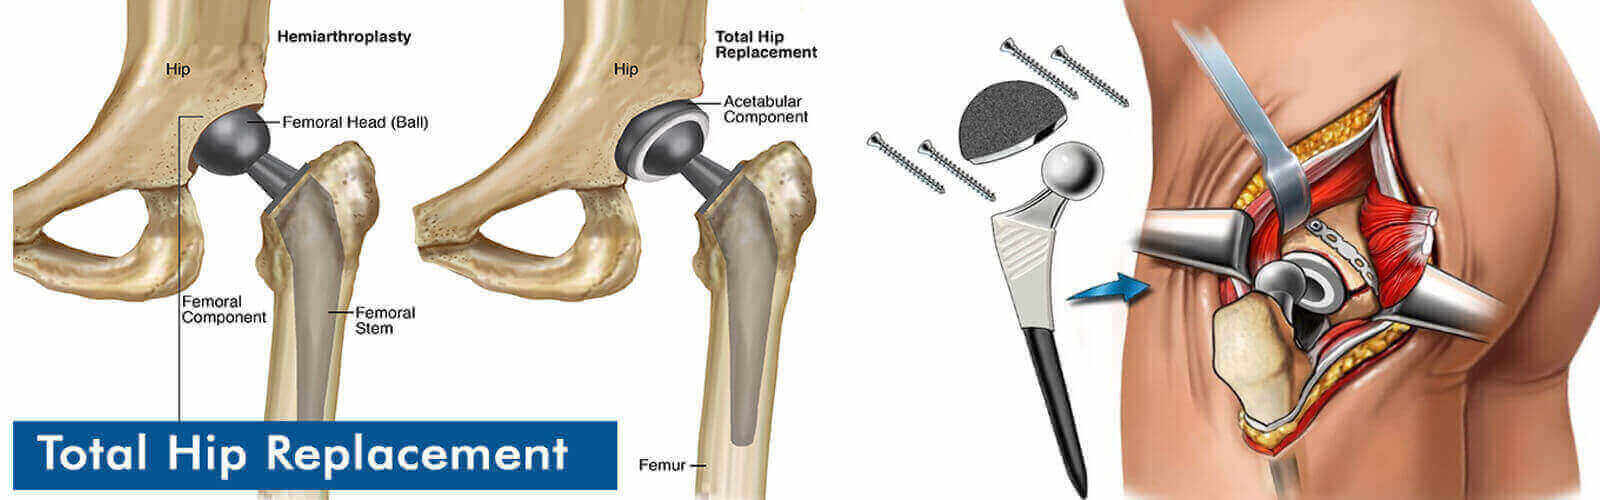 Hip Replacement Surgery Or Hip Resurfacing in Sierra Leone